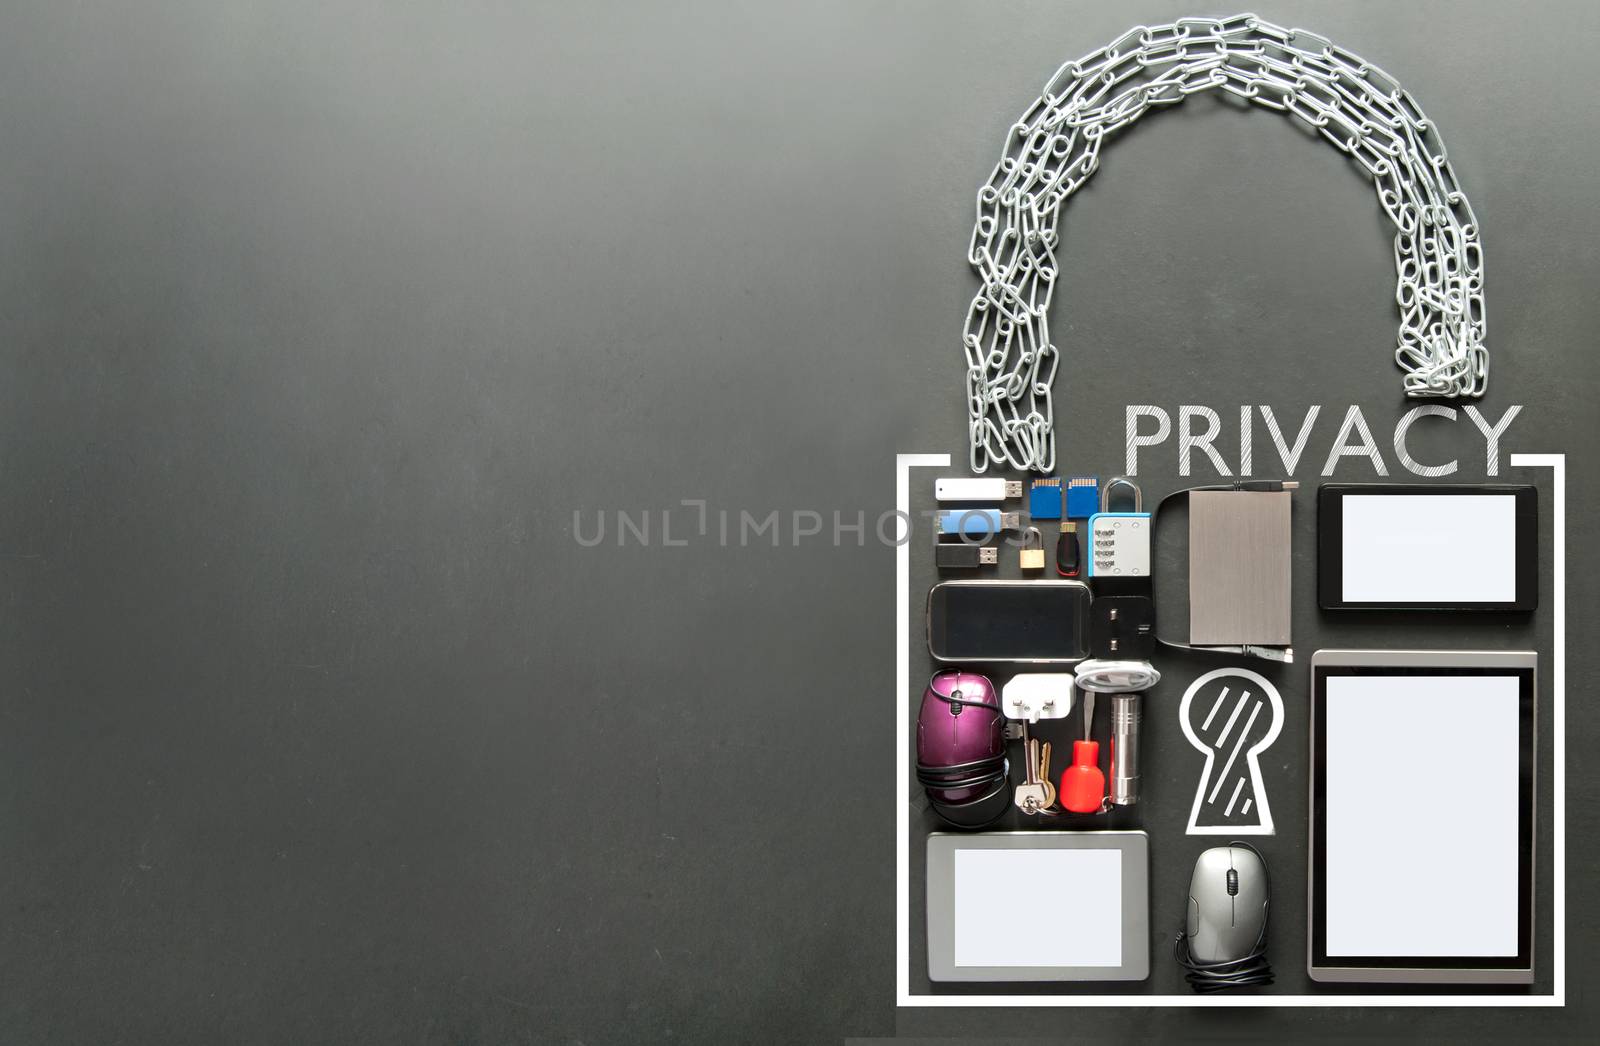 Privacy padlock security concept by unikpix